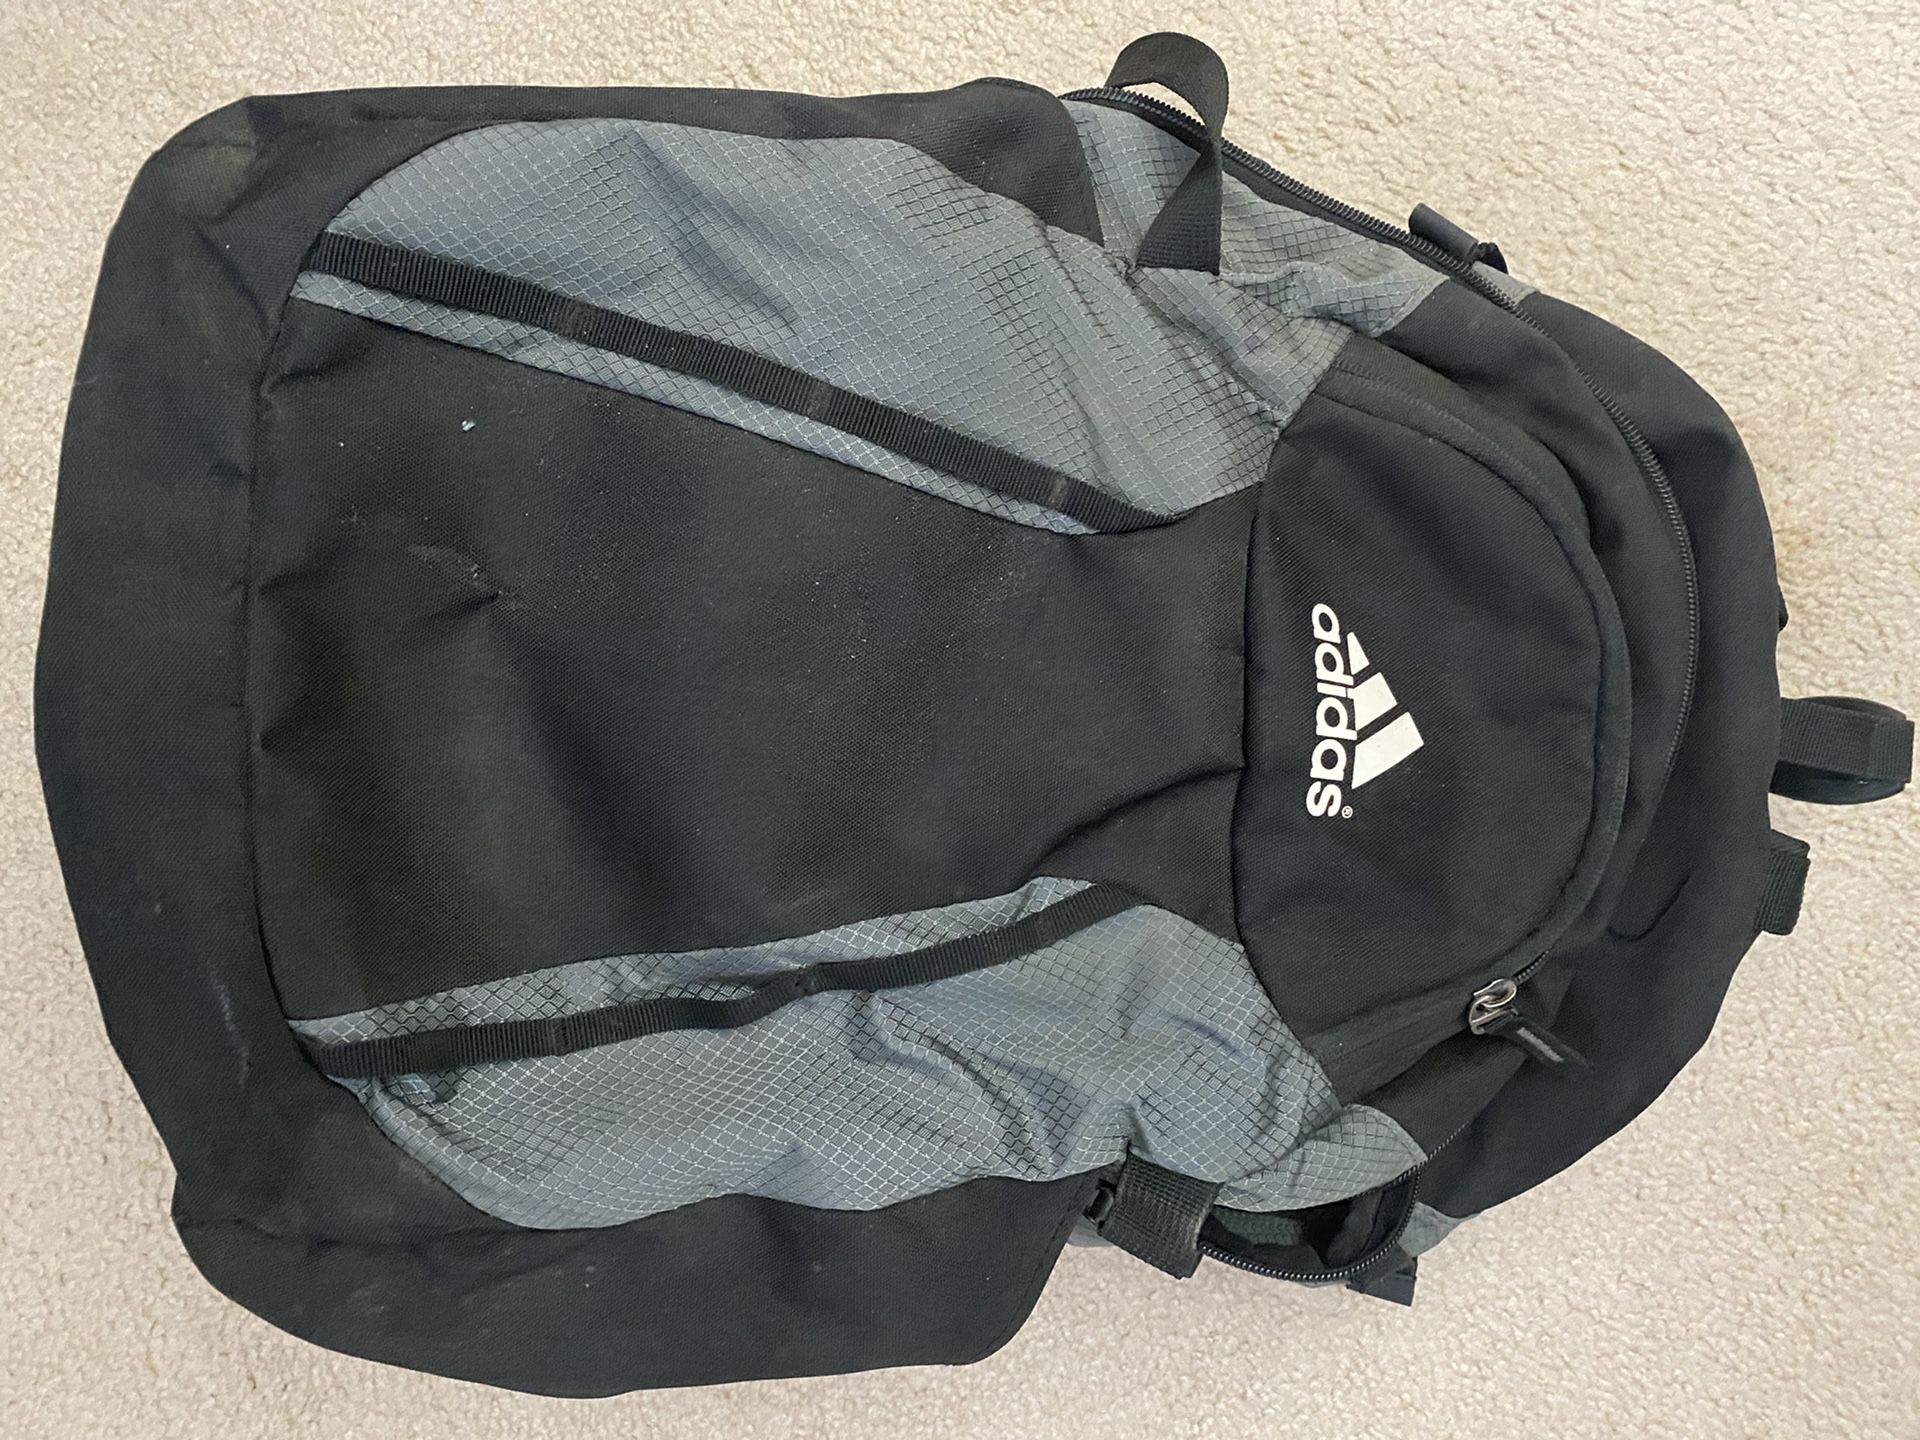 Barely Used Perfect Condition Adidas Baseball Equipment Backpack!